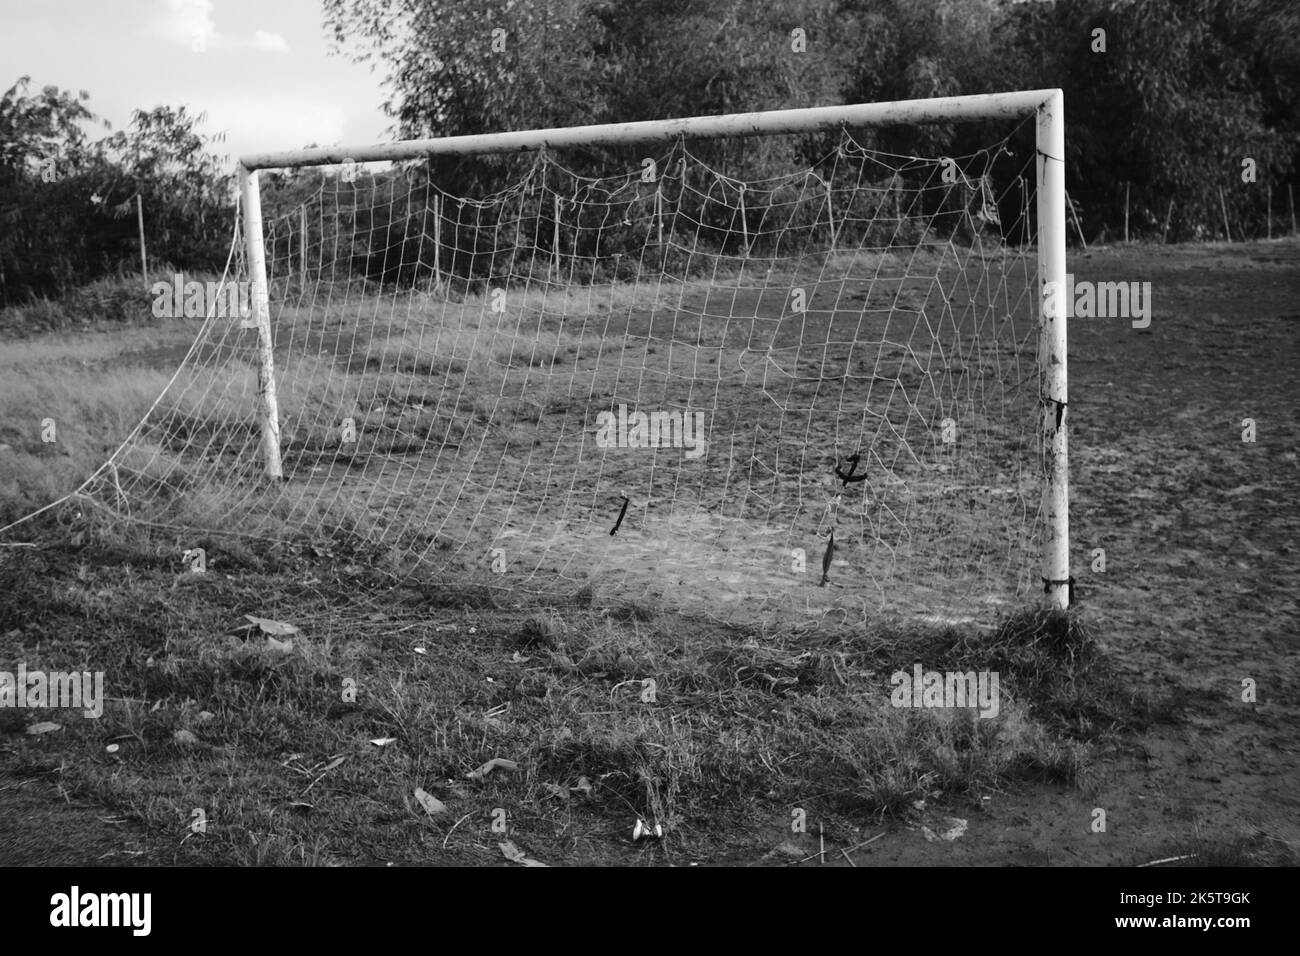 Soccer Goal, Monochrome photo of a soccer goal on a dirt field in the Cikancung area, Indonesia Stock Photo